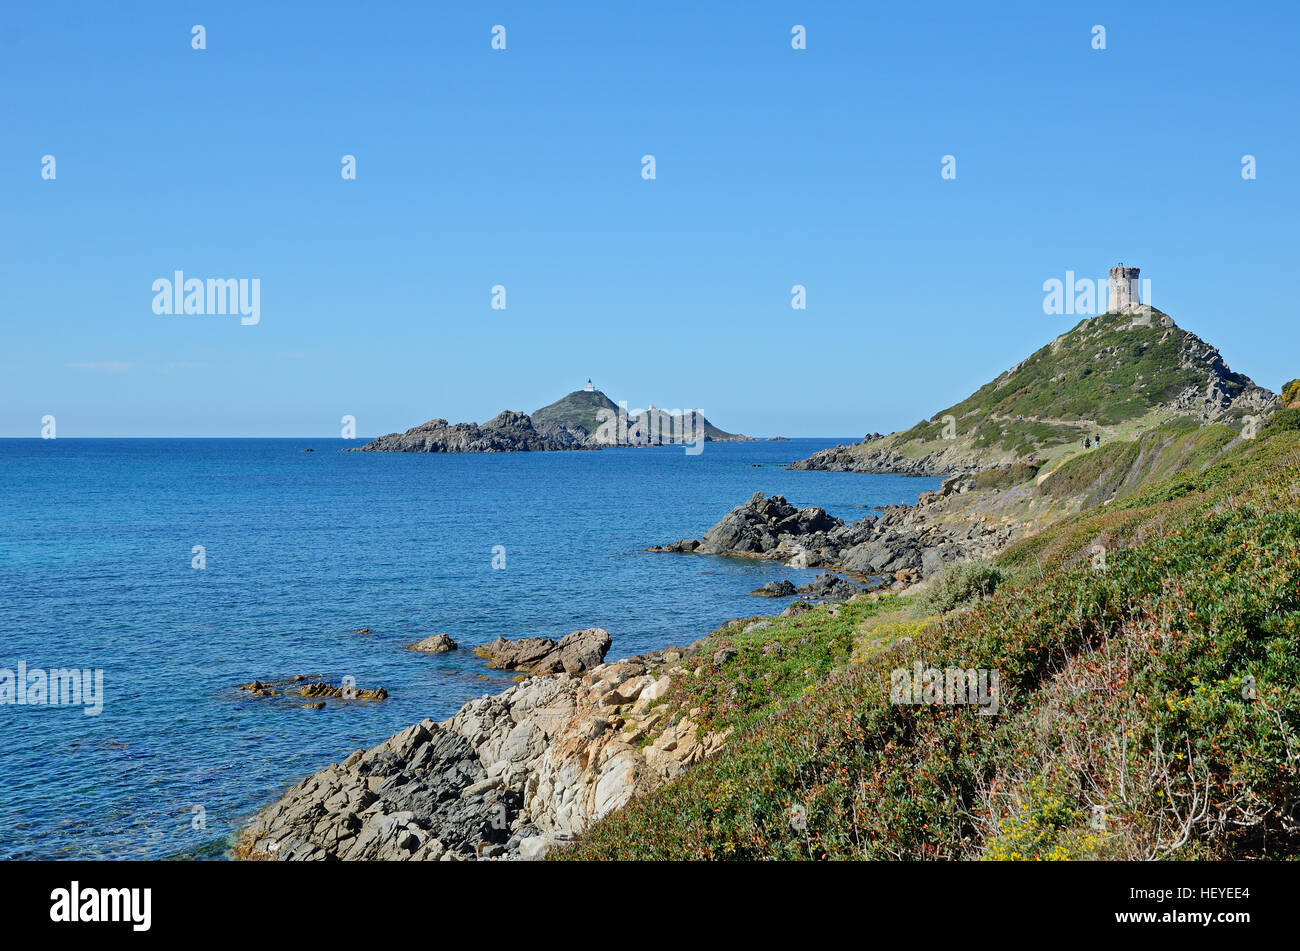 Headland at Pointe de la Parata with the extant Genoese tower is situated near the Isles Sanguinaires (the Archipelago of the Sanguinaires) about 15km Stock Photo